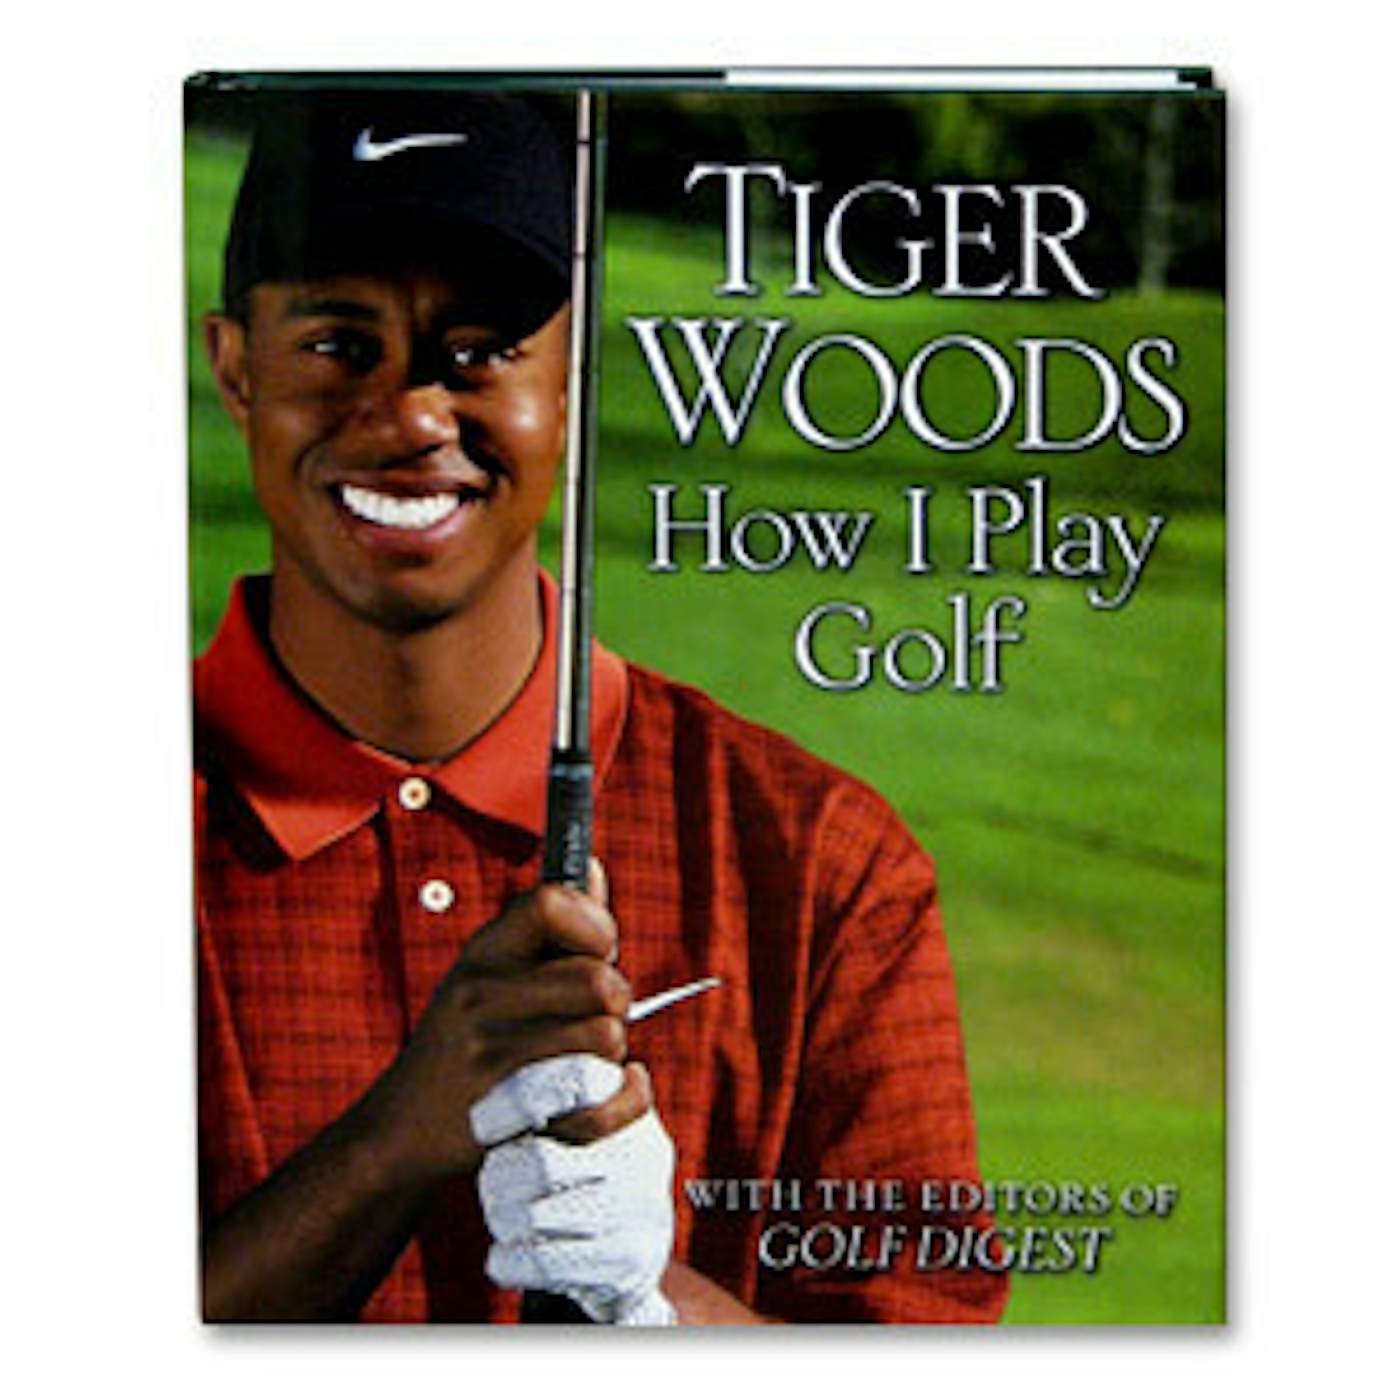 How I Play Golf, by Tiger Woods